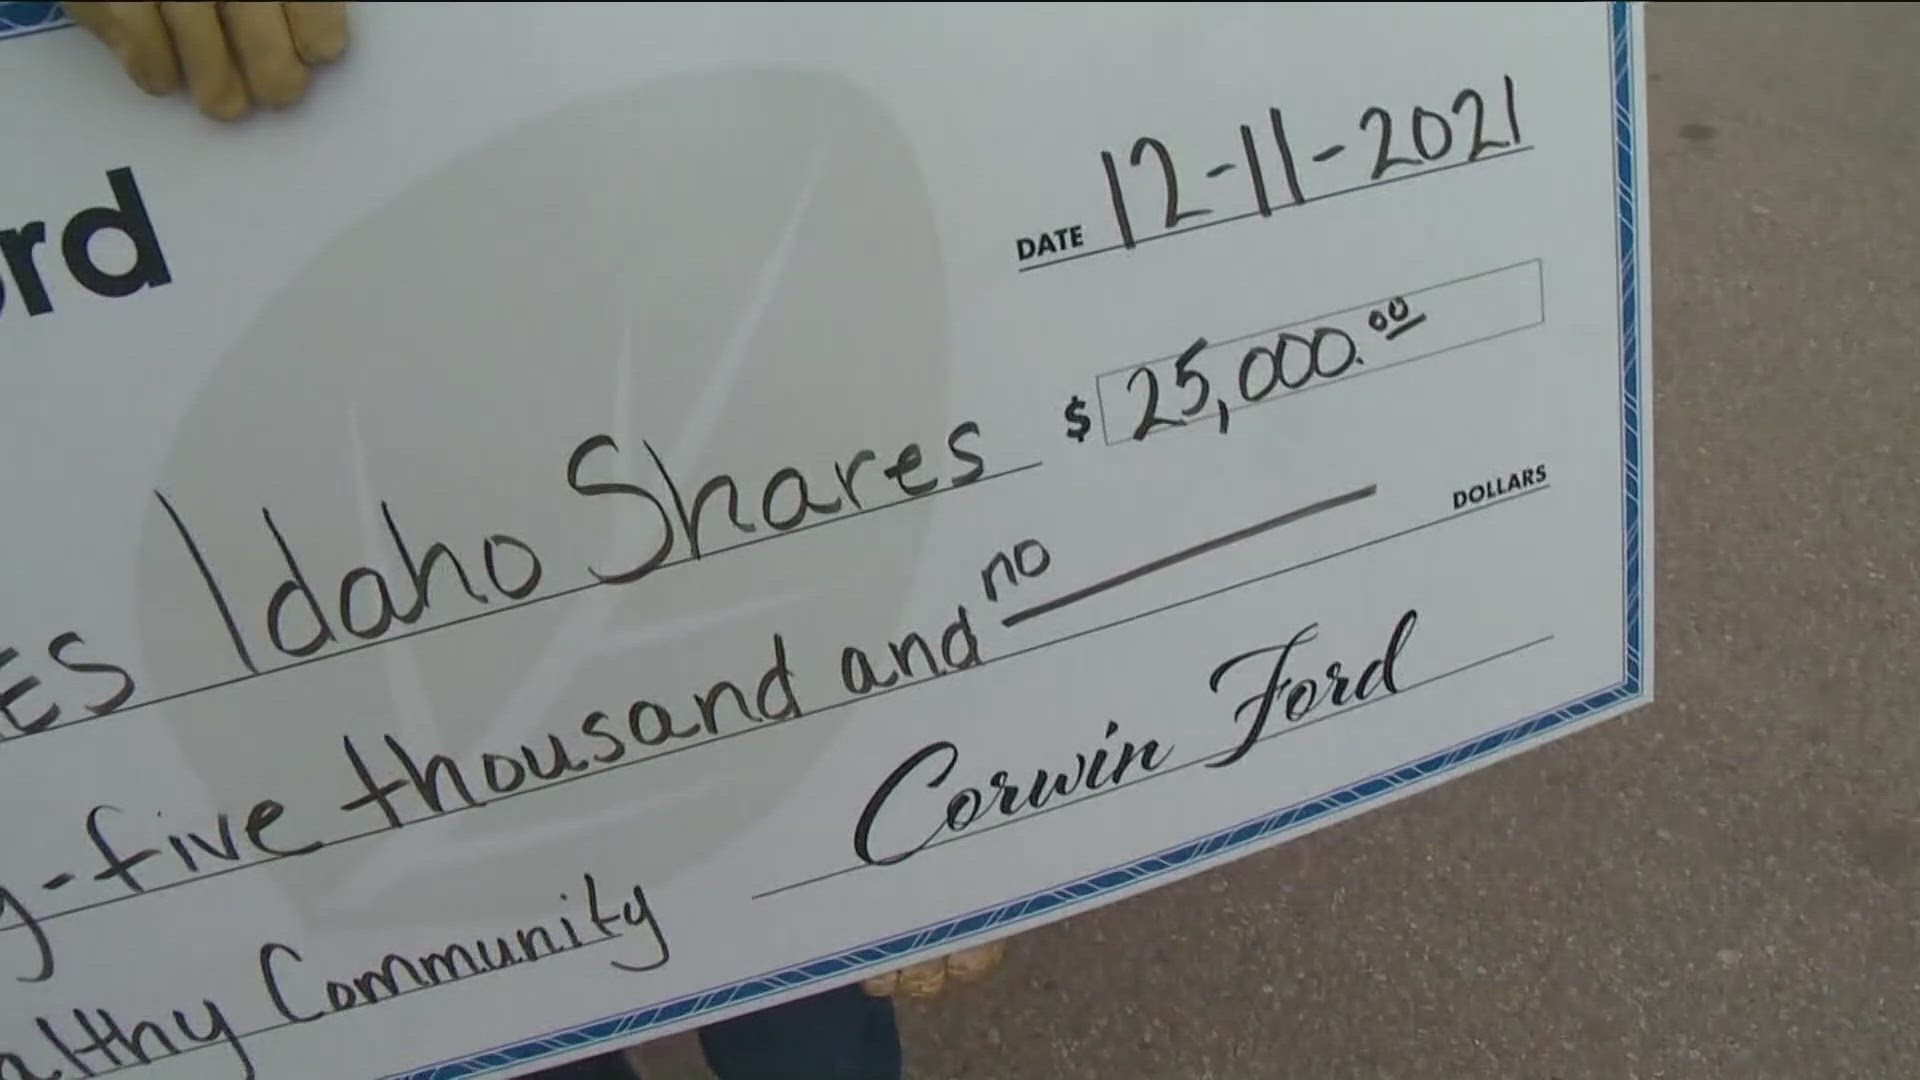 For KTVB's 16th annual 7Cares Idaho Shares campaign, Corwin Ford is showing support for Idahoans in need as a featured Company that Cares.